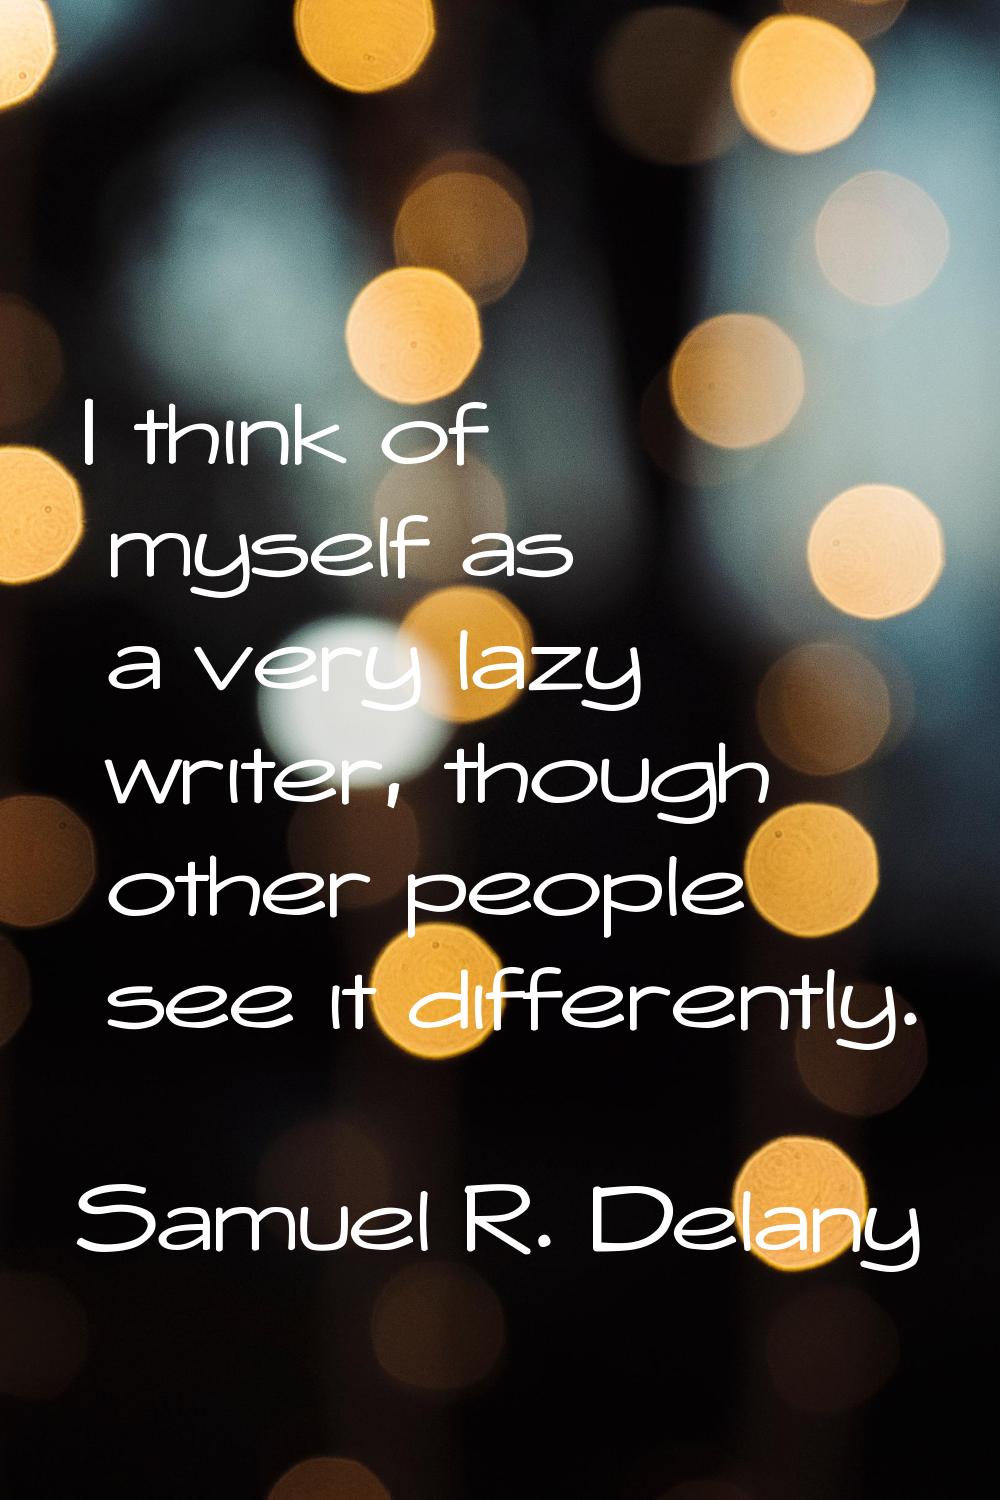 I think of myself as a very lazy writer, though other people see it differently.